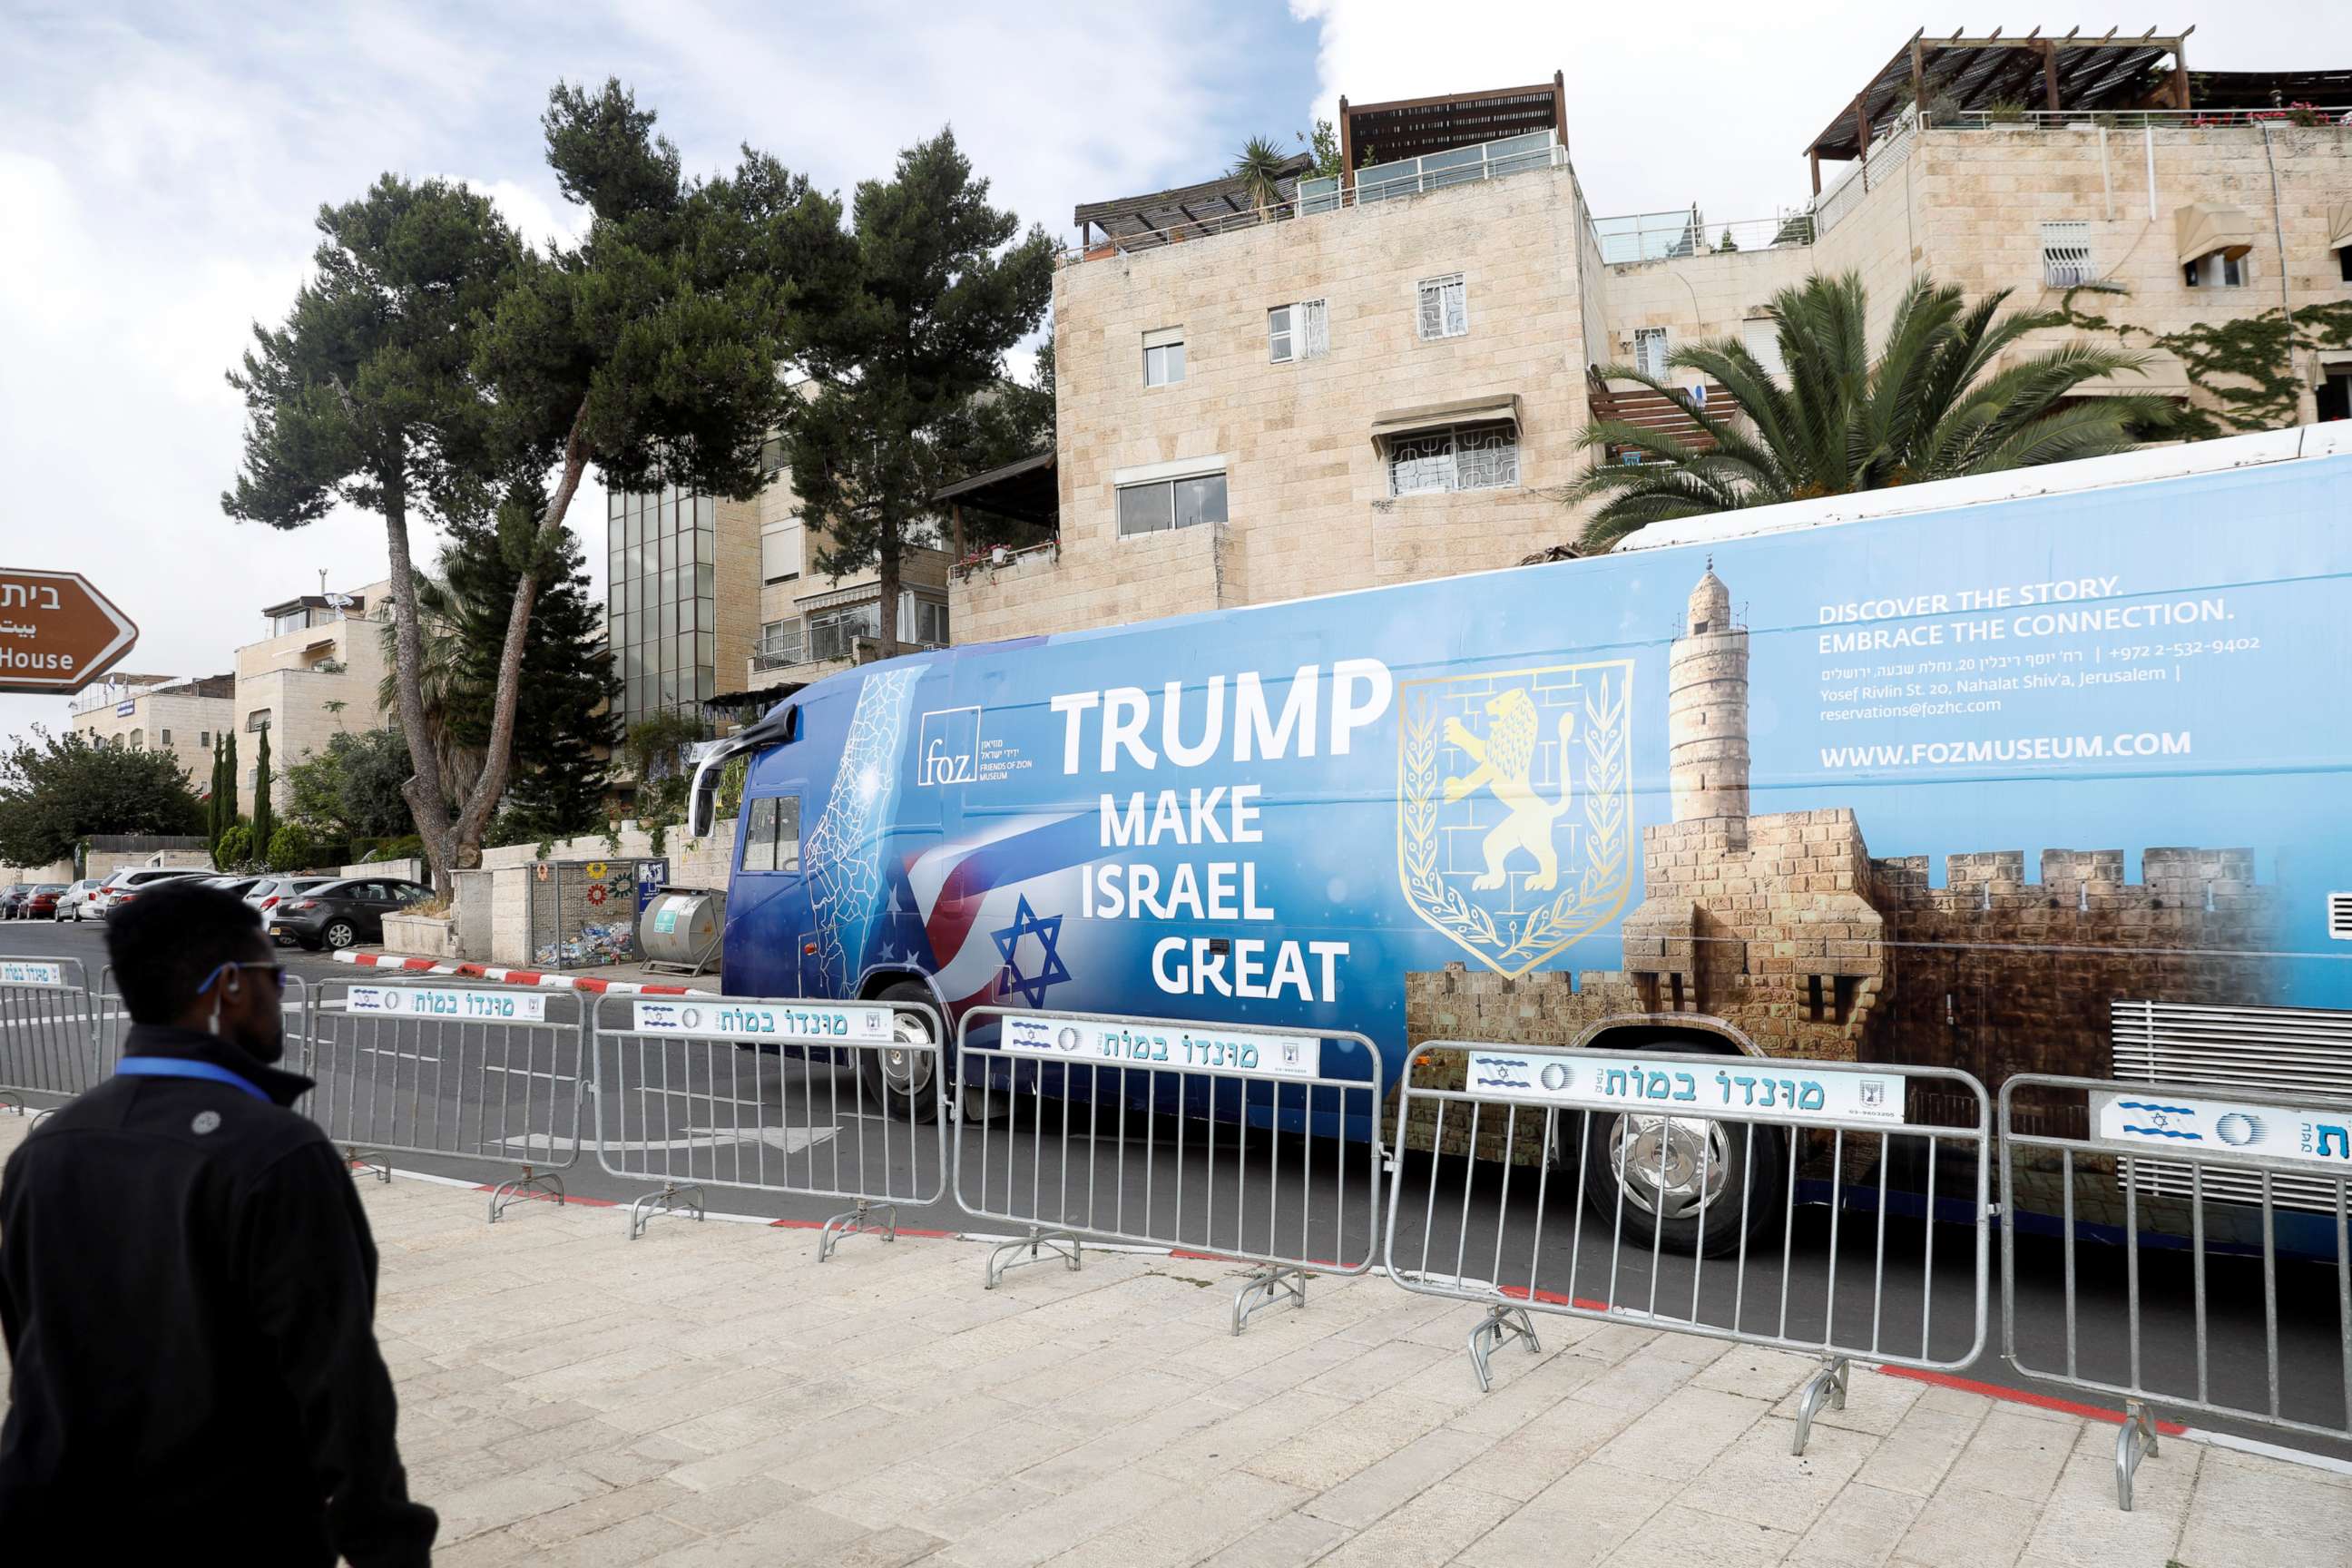 PHOTO: A bus decorated with Israeli and U.S. flags and a message welcoming the move of the U.S. embassy to Jerusalem is seen near the location of the new U.S. embassy in Jerusalem, May 13, 2018.